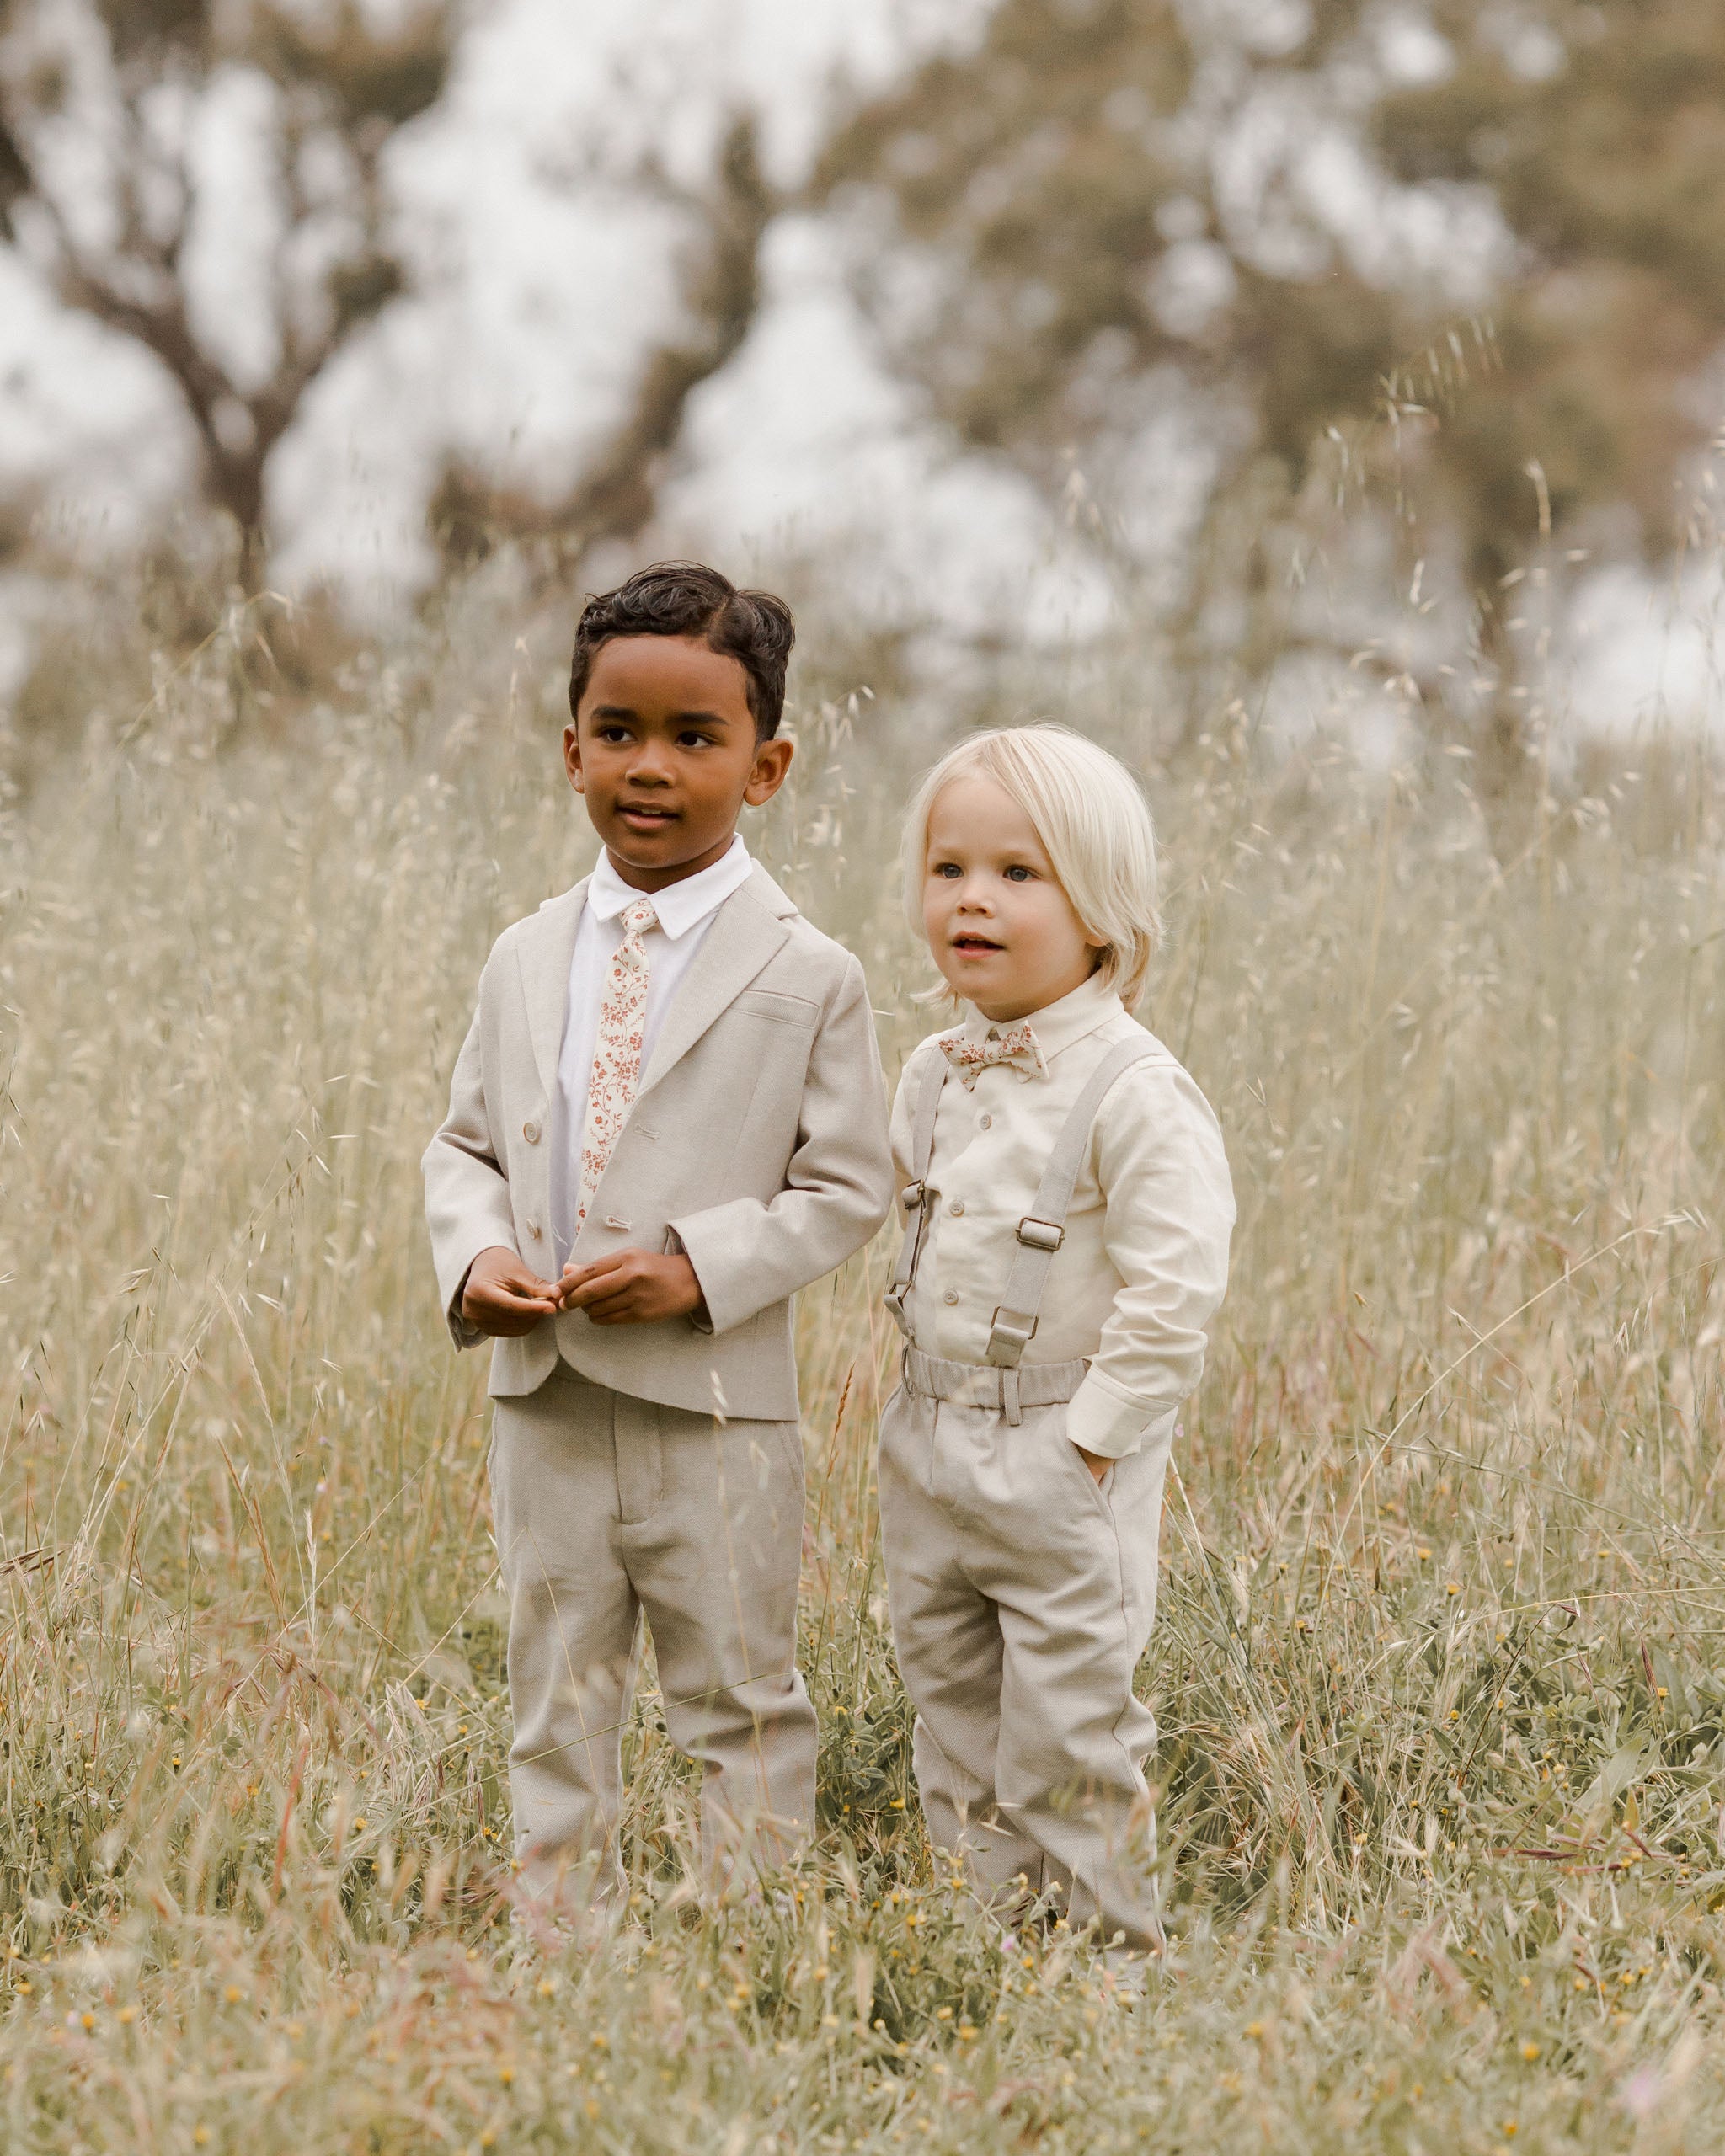 Skinny Tie || Vines - Rylee + Cru | Kids Clothes | Trendy Baby Clothes | Modern Infant Outfits |